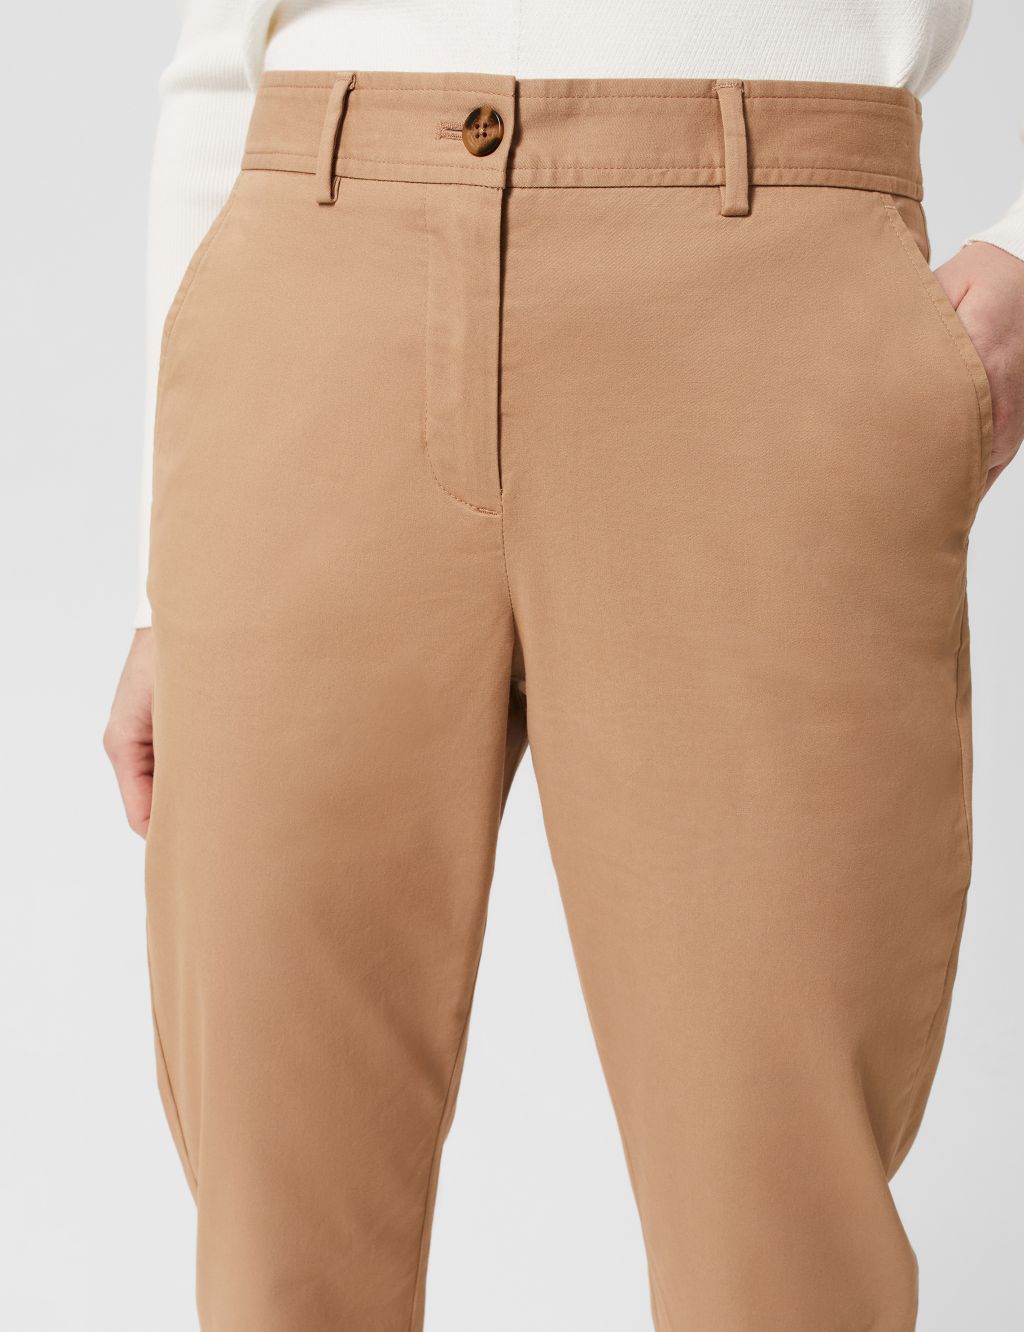 Cotton Rich Chinos image 4